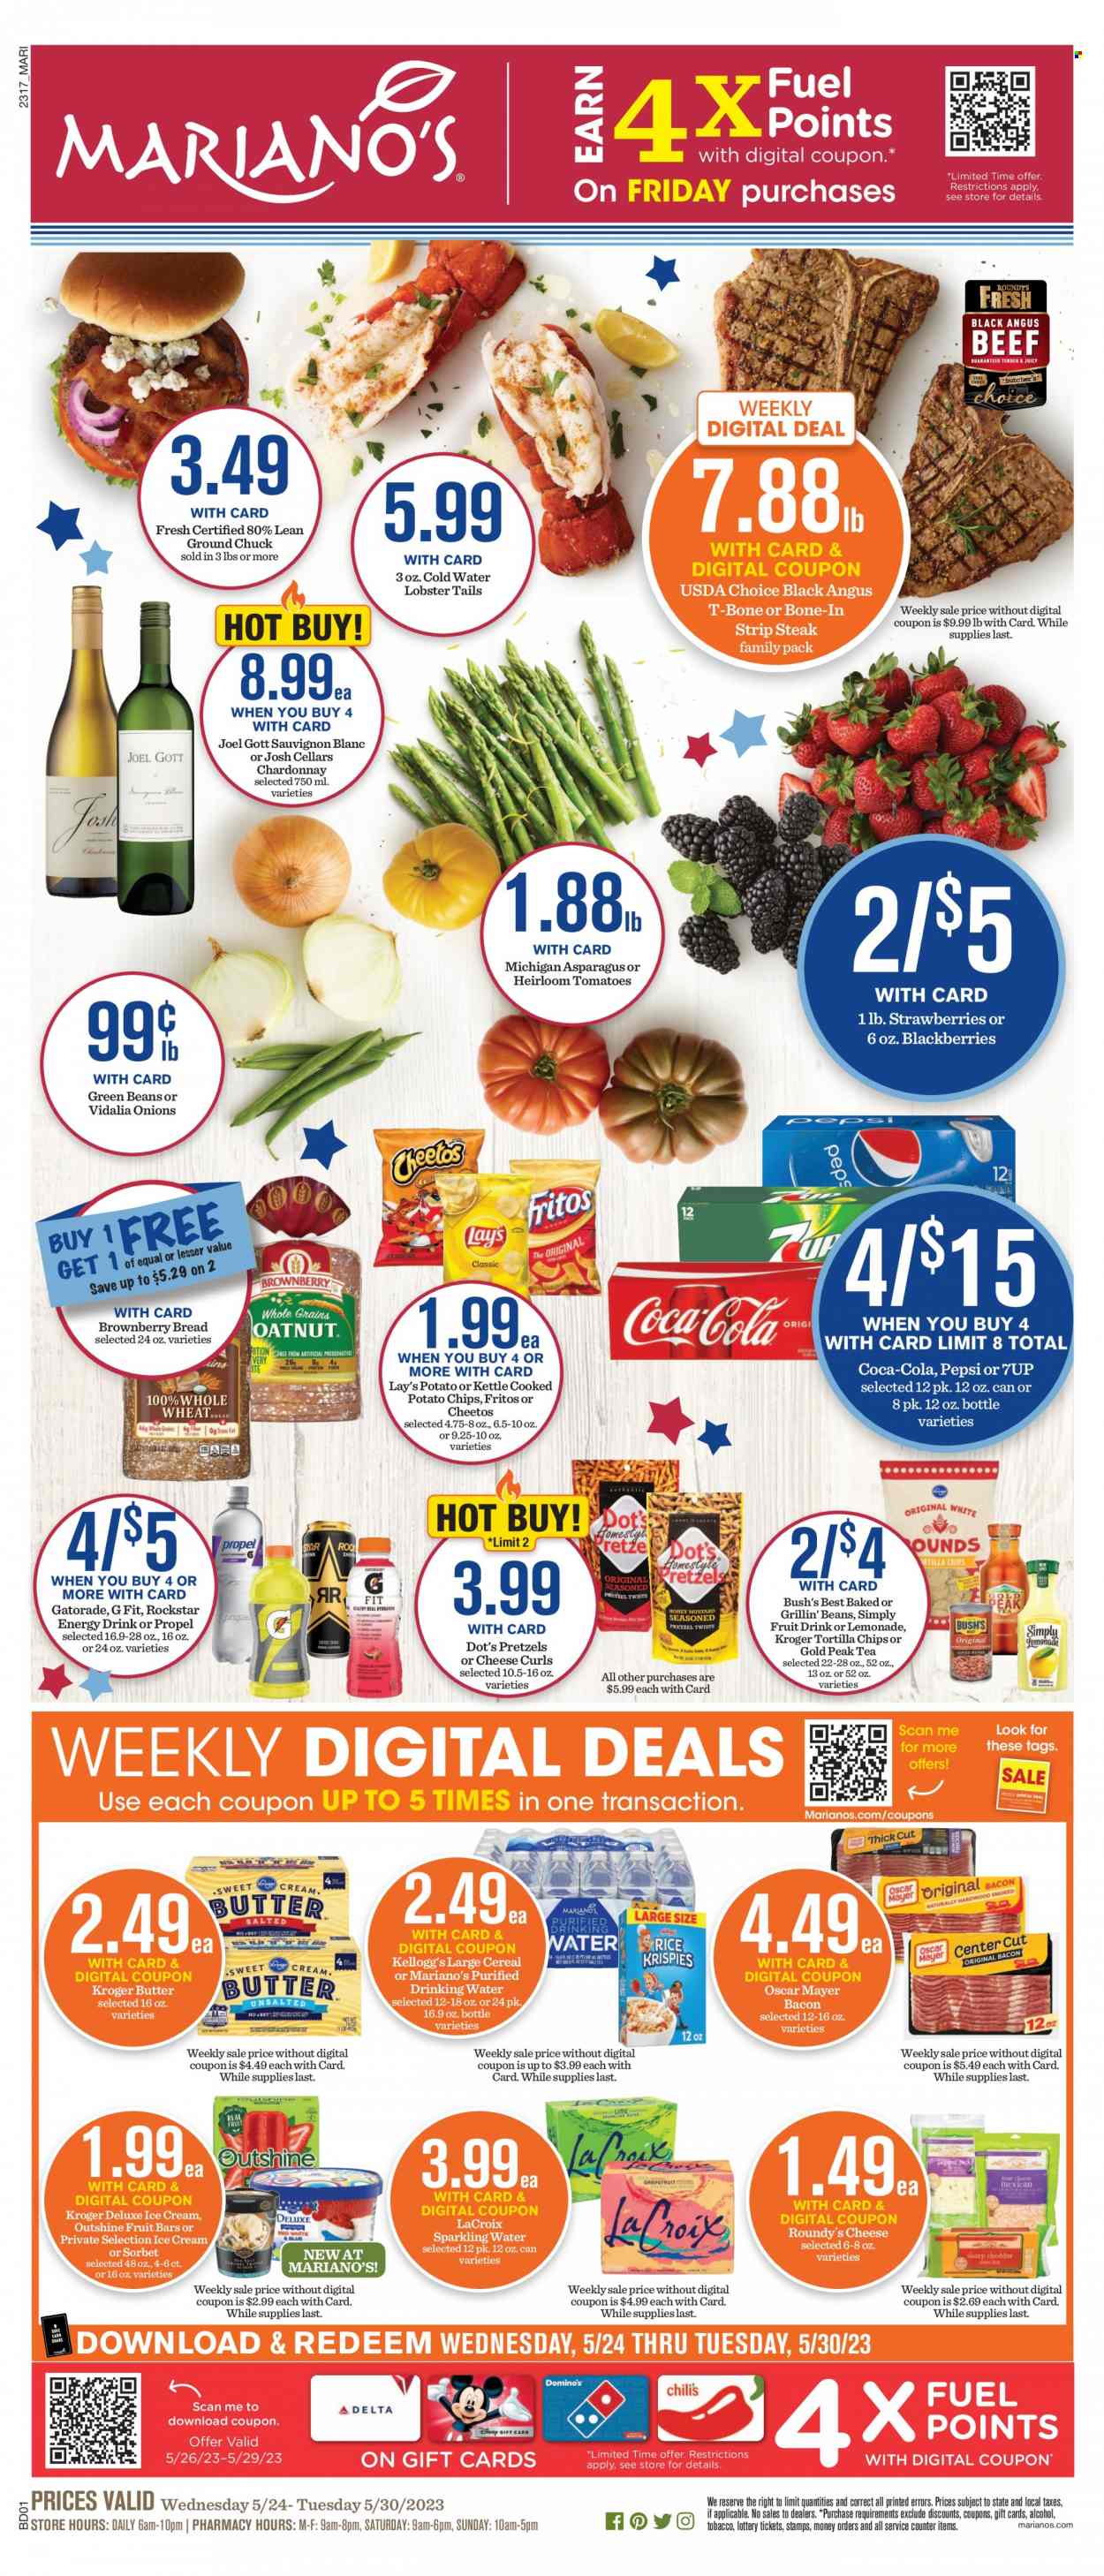 thumbnail - Mariano’s Flyer - 05/24/2023 - 05/30/2023 - Sales products - bread, pretzels, beans, green beans, tomatoes, onion, blackberries, strawberries, lobster, lobster tail, bacon, Oscar Mayer, ice cream, fruit bar, sorbet, Kellogg's, Fritos, tortilla chips, potato chips, Cheetos, chips, Lay’s, baked beans, cereals, Coca-Cola, lemonade, Pepsi, energy drink, fruit drink, soft drink, 7UP, Gold Peak Tea, Rockstar, Gatorade, sparkling water, water, tea, white wine, Chardonnay, wine, alcohol, Sauvignon Blanc, beef meat, ground chuck, t-bone steak, steak, striploin steak, electrolyte drink. Page 1.